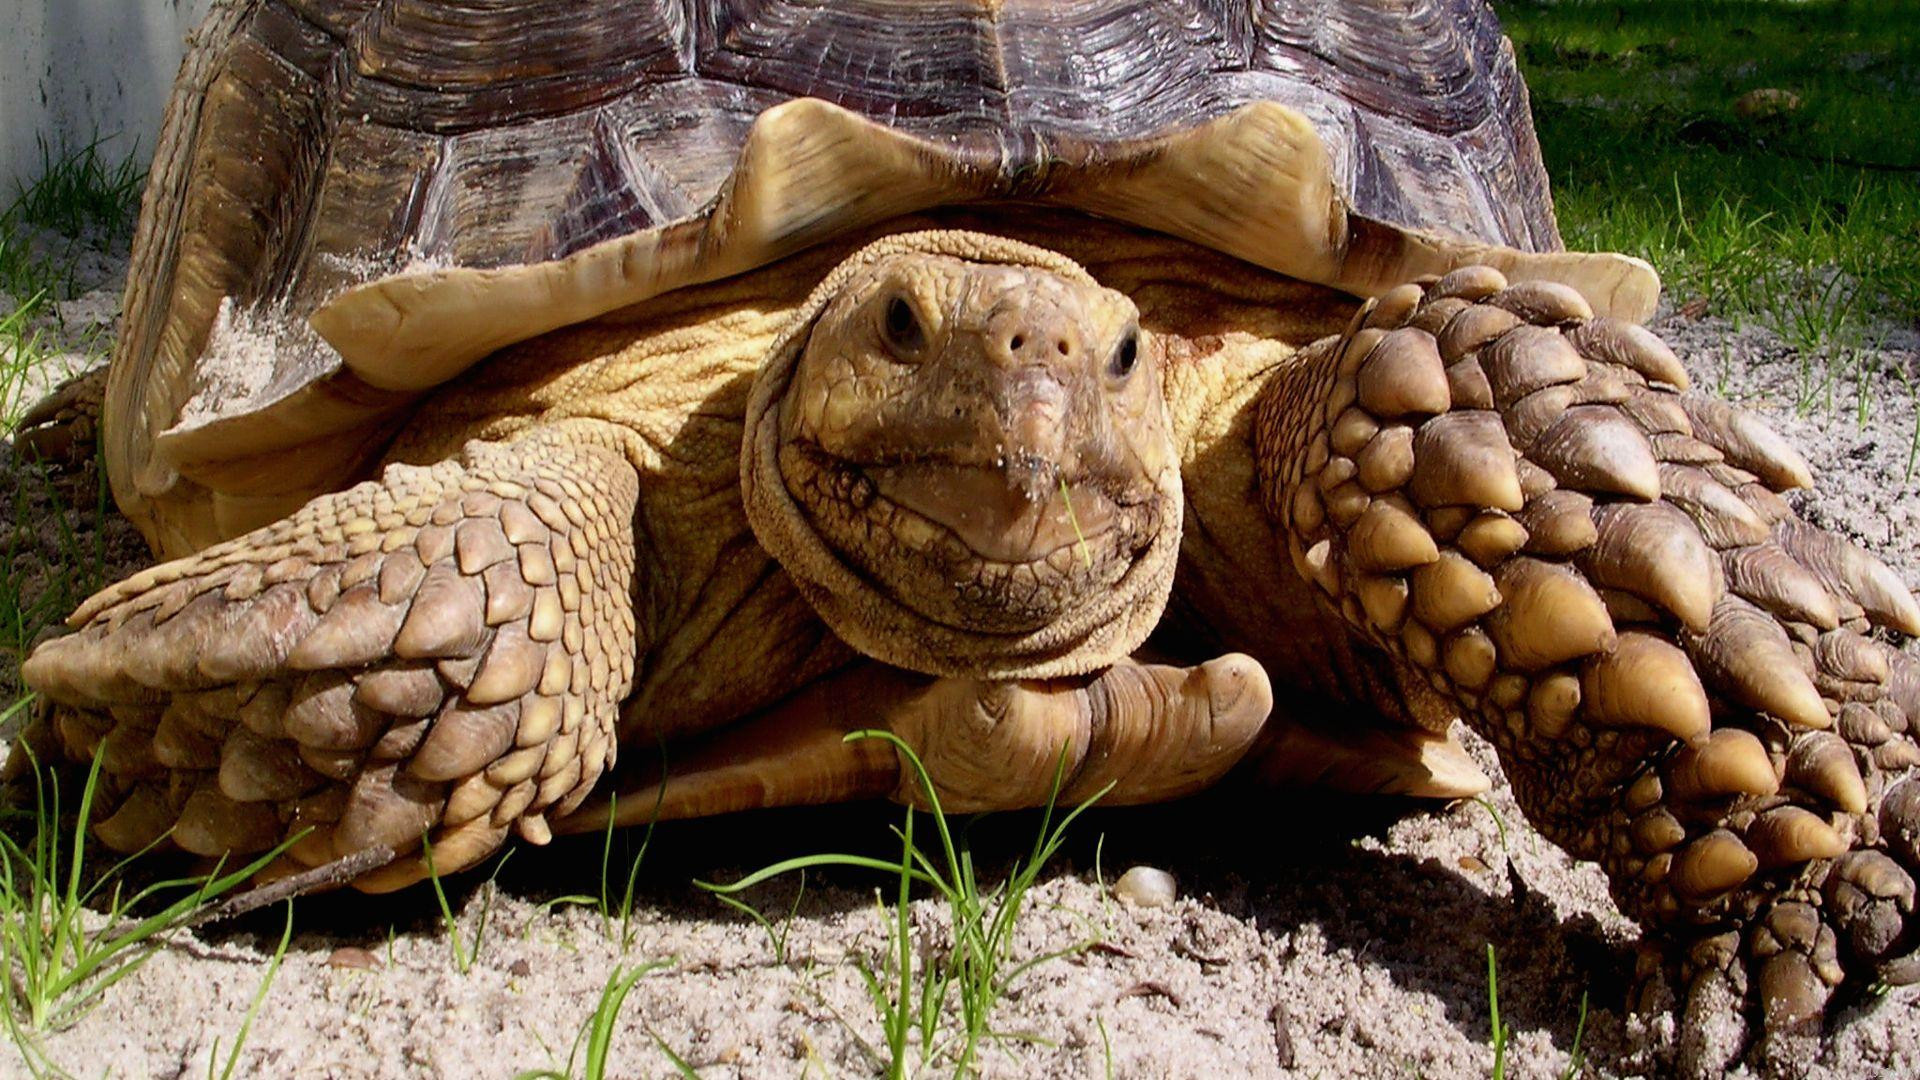 Adorable tortoise portraits, Cute and cuddly, Gentle herbivores, Endearing reptiles, 1920x1080 Full HD Desktop